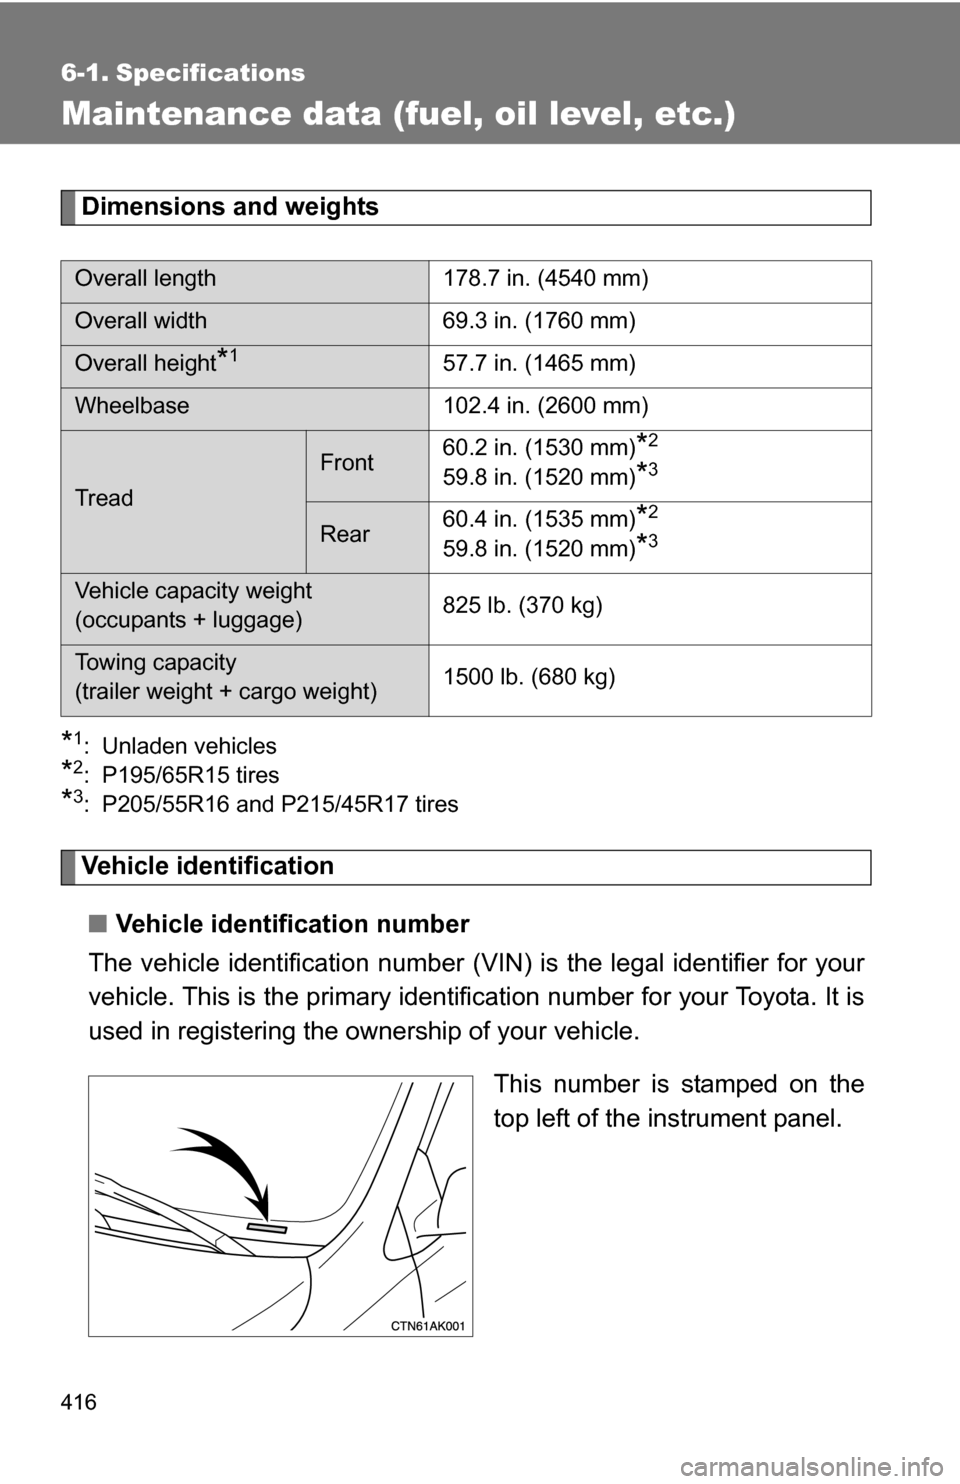 TOYOTA COROLLA 2009 10.G Owners Manual 416
6-1. Specifications
Maintenance data (fuel, oil level, etc.)
Dimensions and weights
*1: Unladen vehicles
*2: P195/65R15 tires
*3: P205/55R16 and P215/45R17 tires
Vehicle identification■ Vehicle 